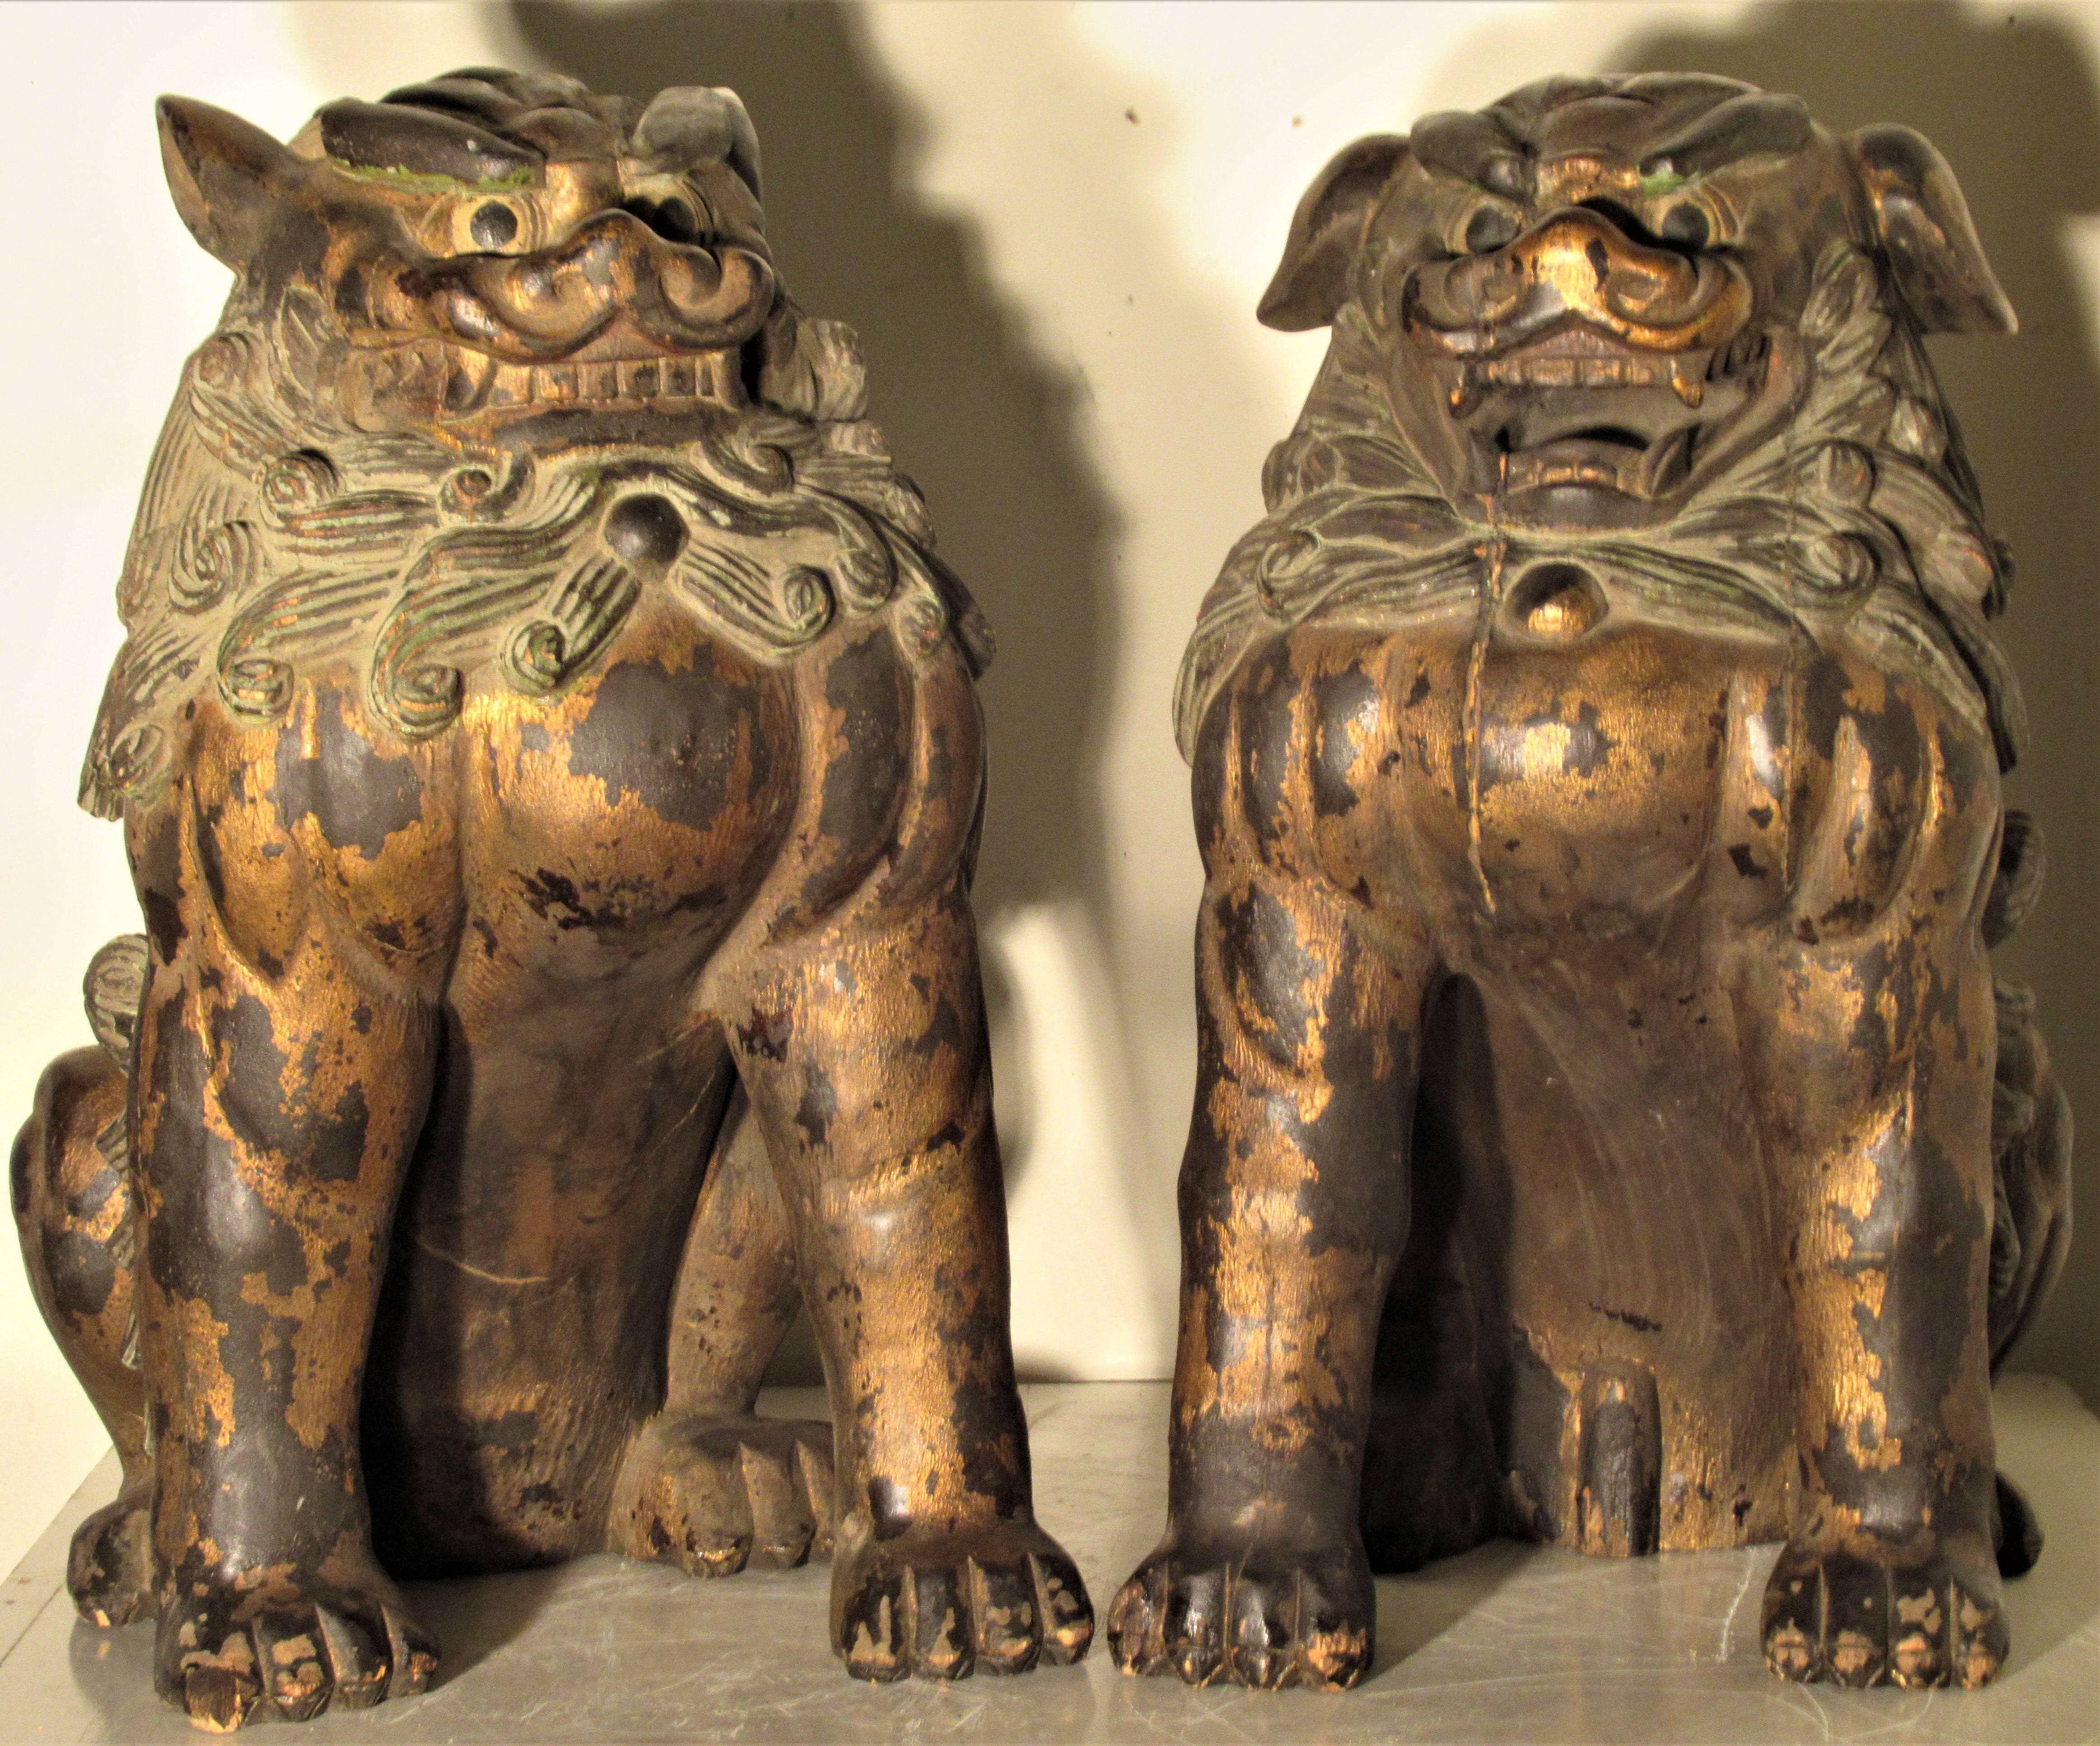 Large and impressive true pair of carved wood food lion dogs in beautifully aged original gilded and polychrome painted surface. Both dogs with striking expressive features and they look great from all angles. We think these date circa 1930-1940 but